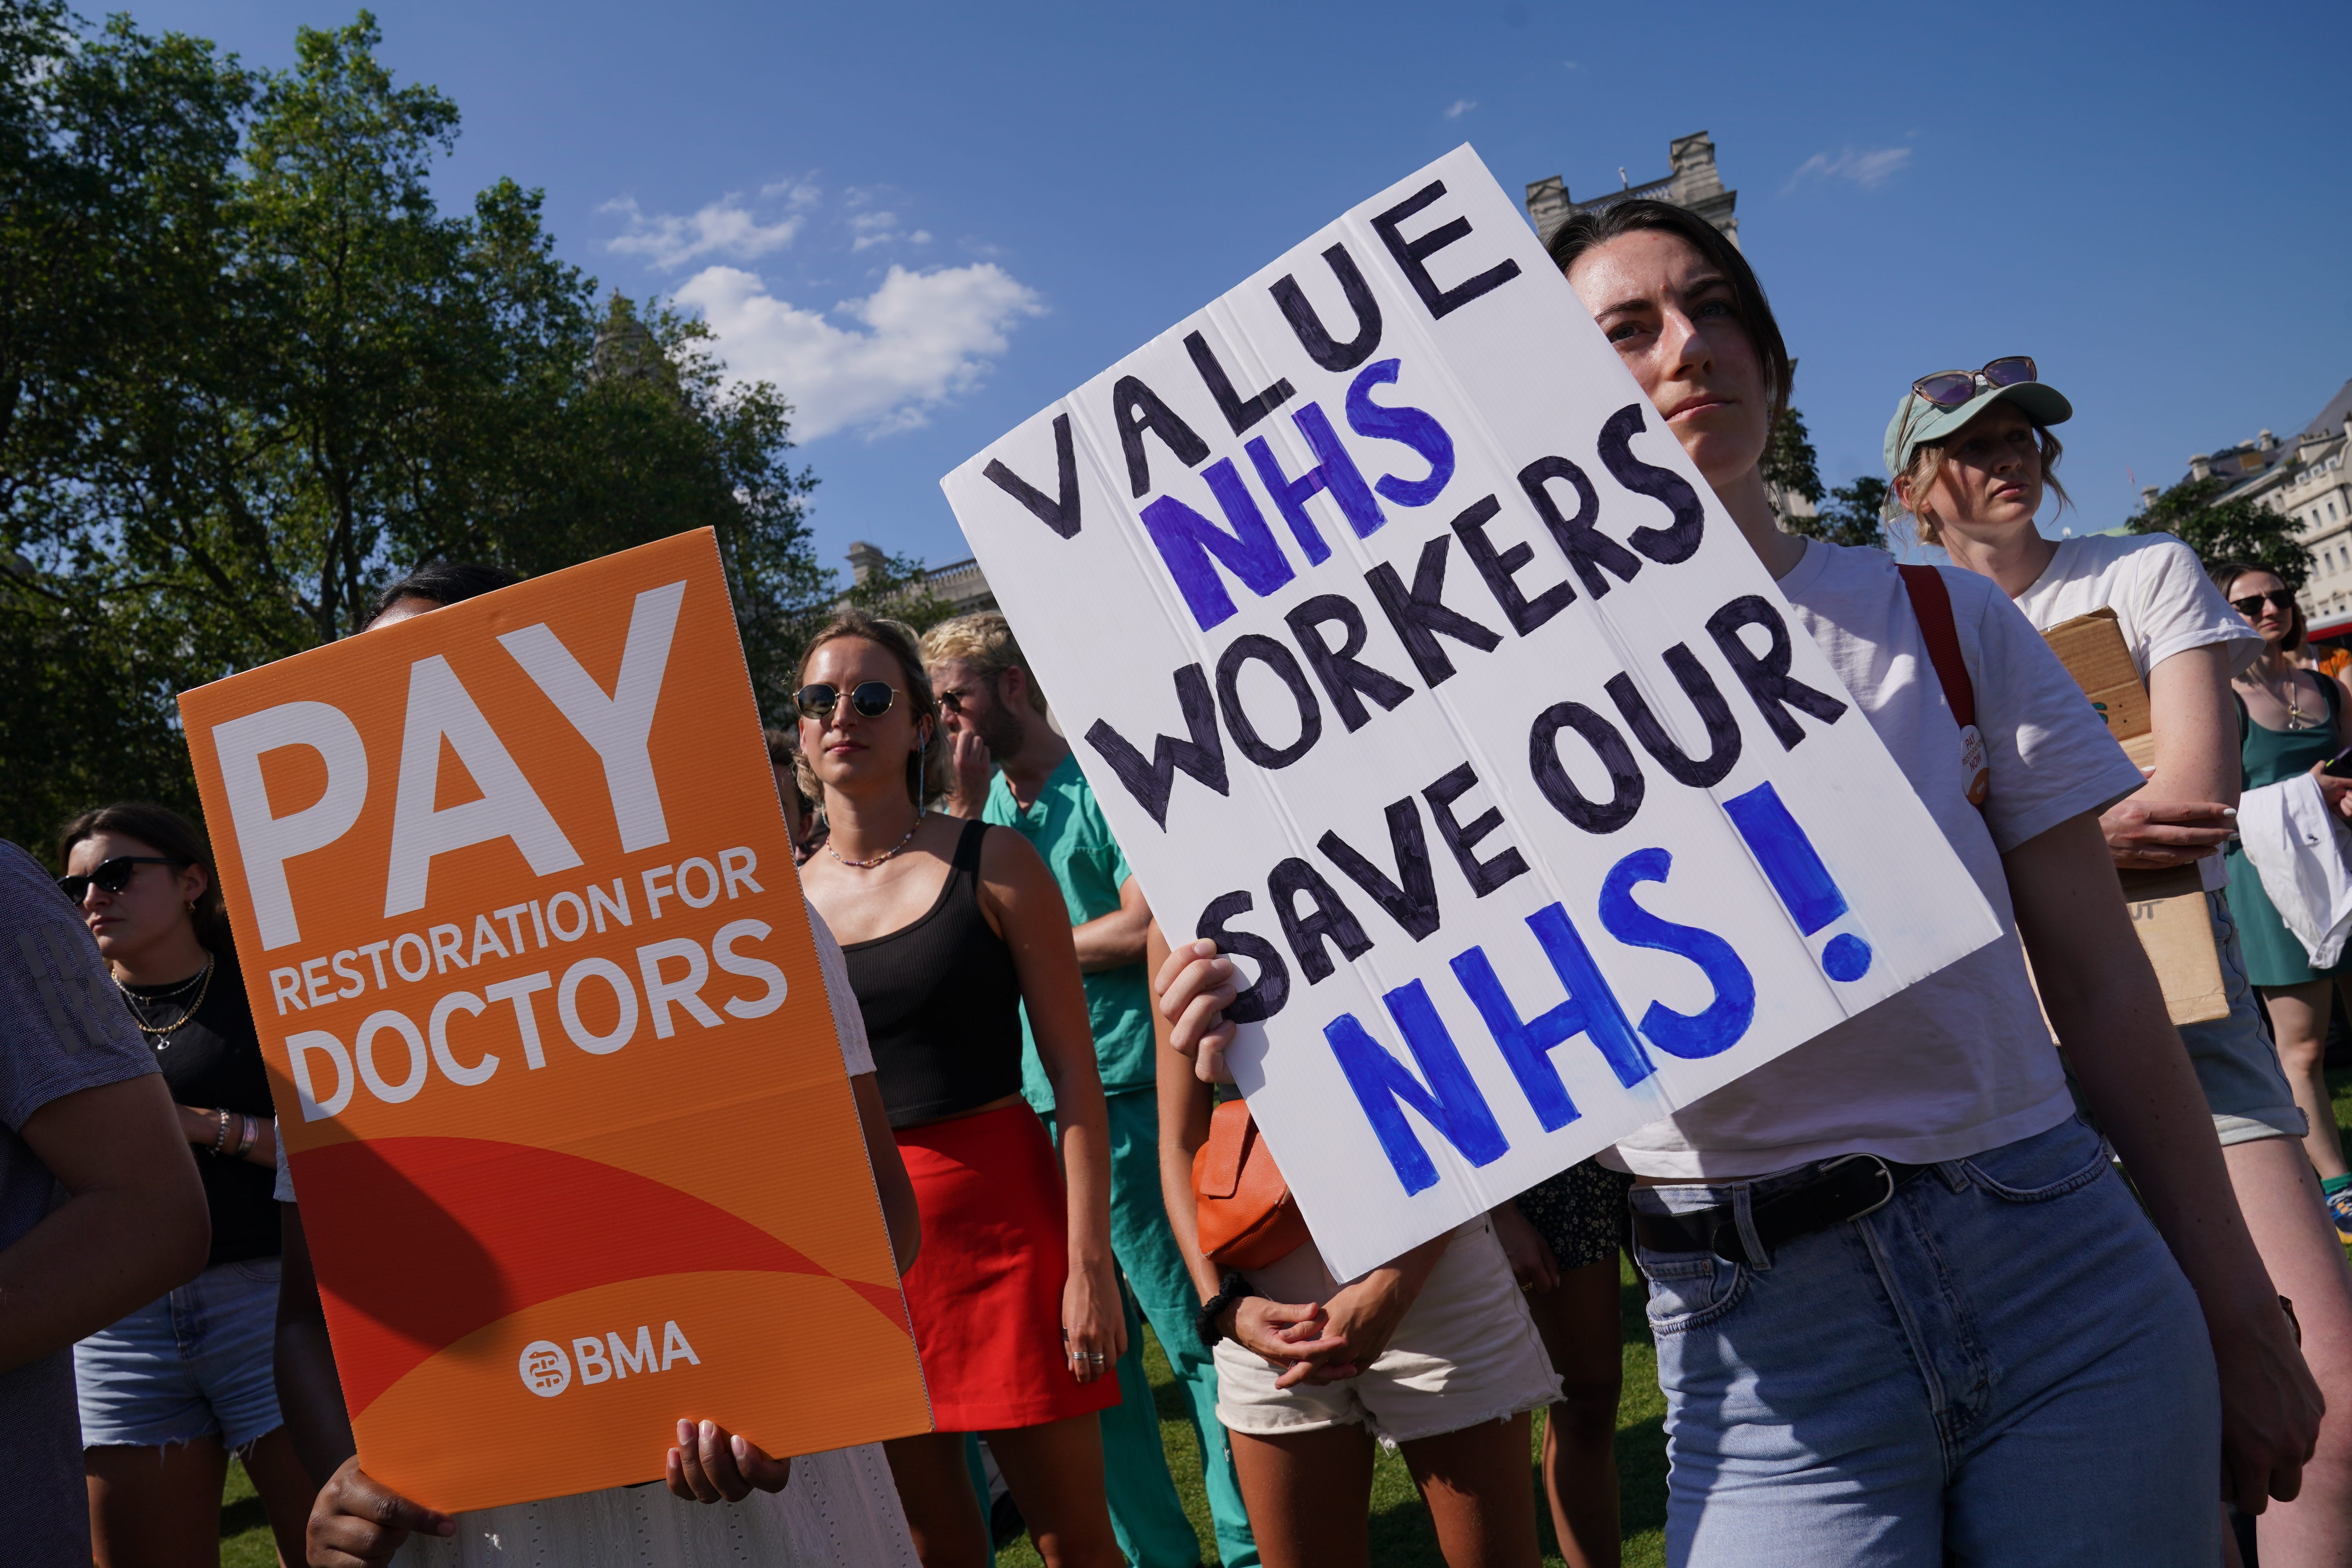 Ministers’ stance on pay review recommendations has the potential to spark further public sector strikes (Lucy North/PA)